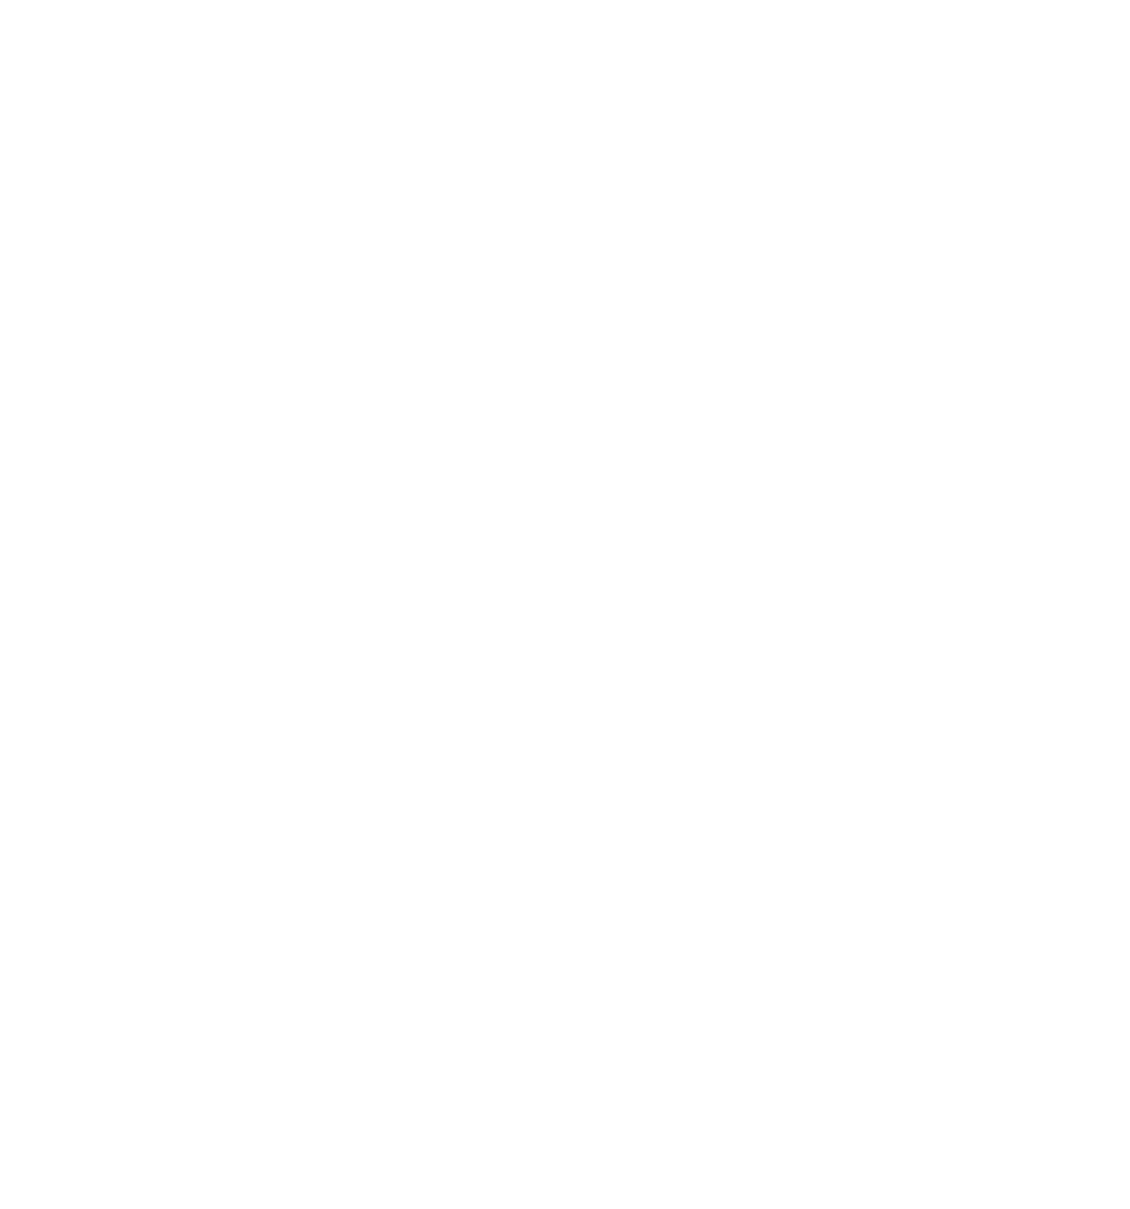 equal housing opportunity logo 1200w WHITE